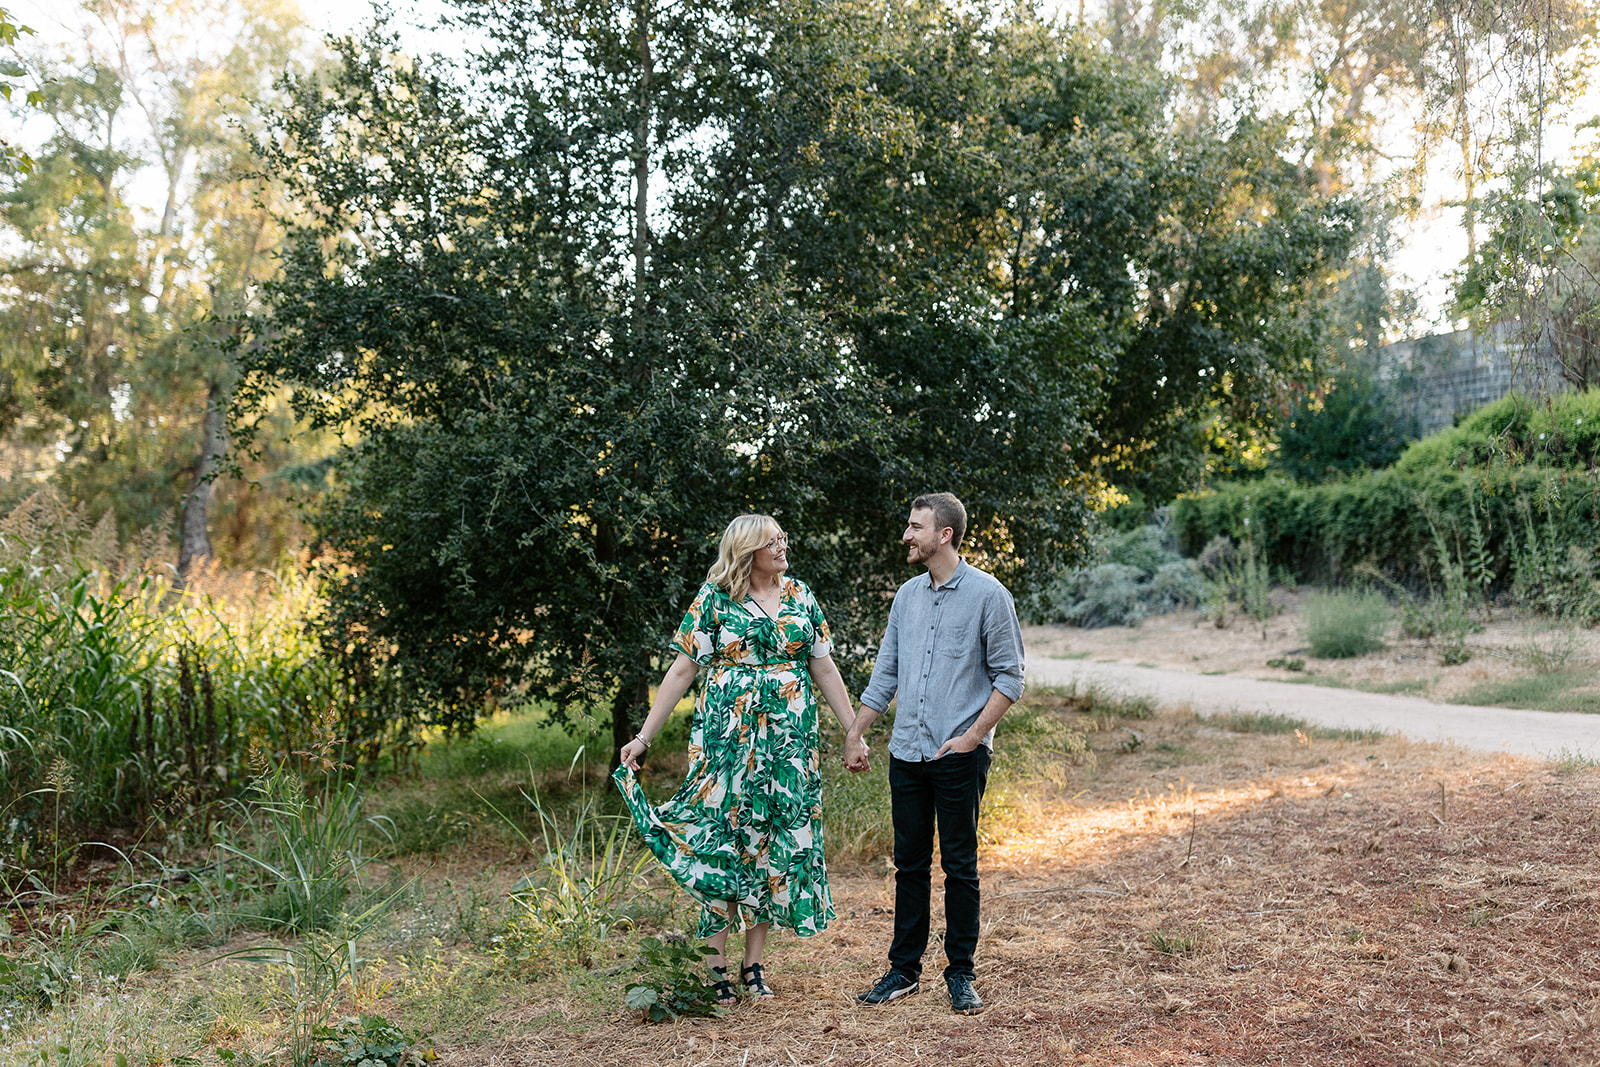 hiltscher park fullerton california engagement session couples poses ideas engagement ring ideas rings outfit ideas